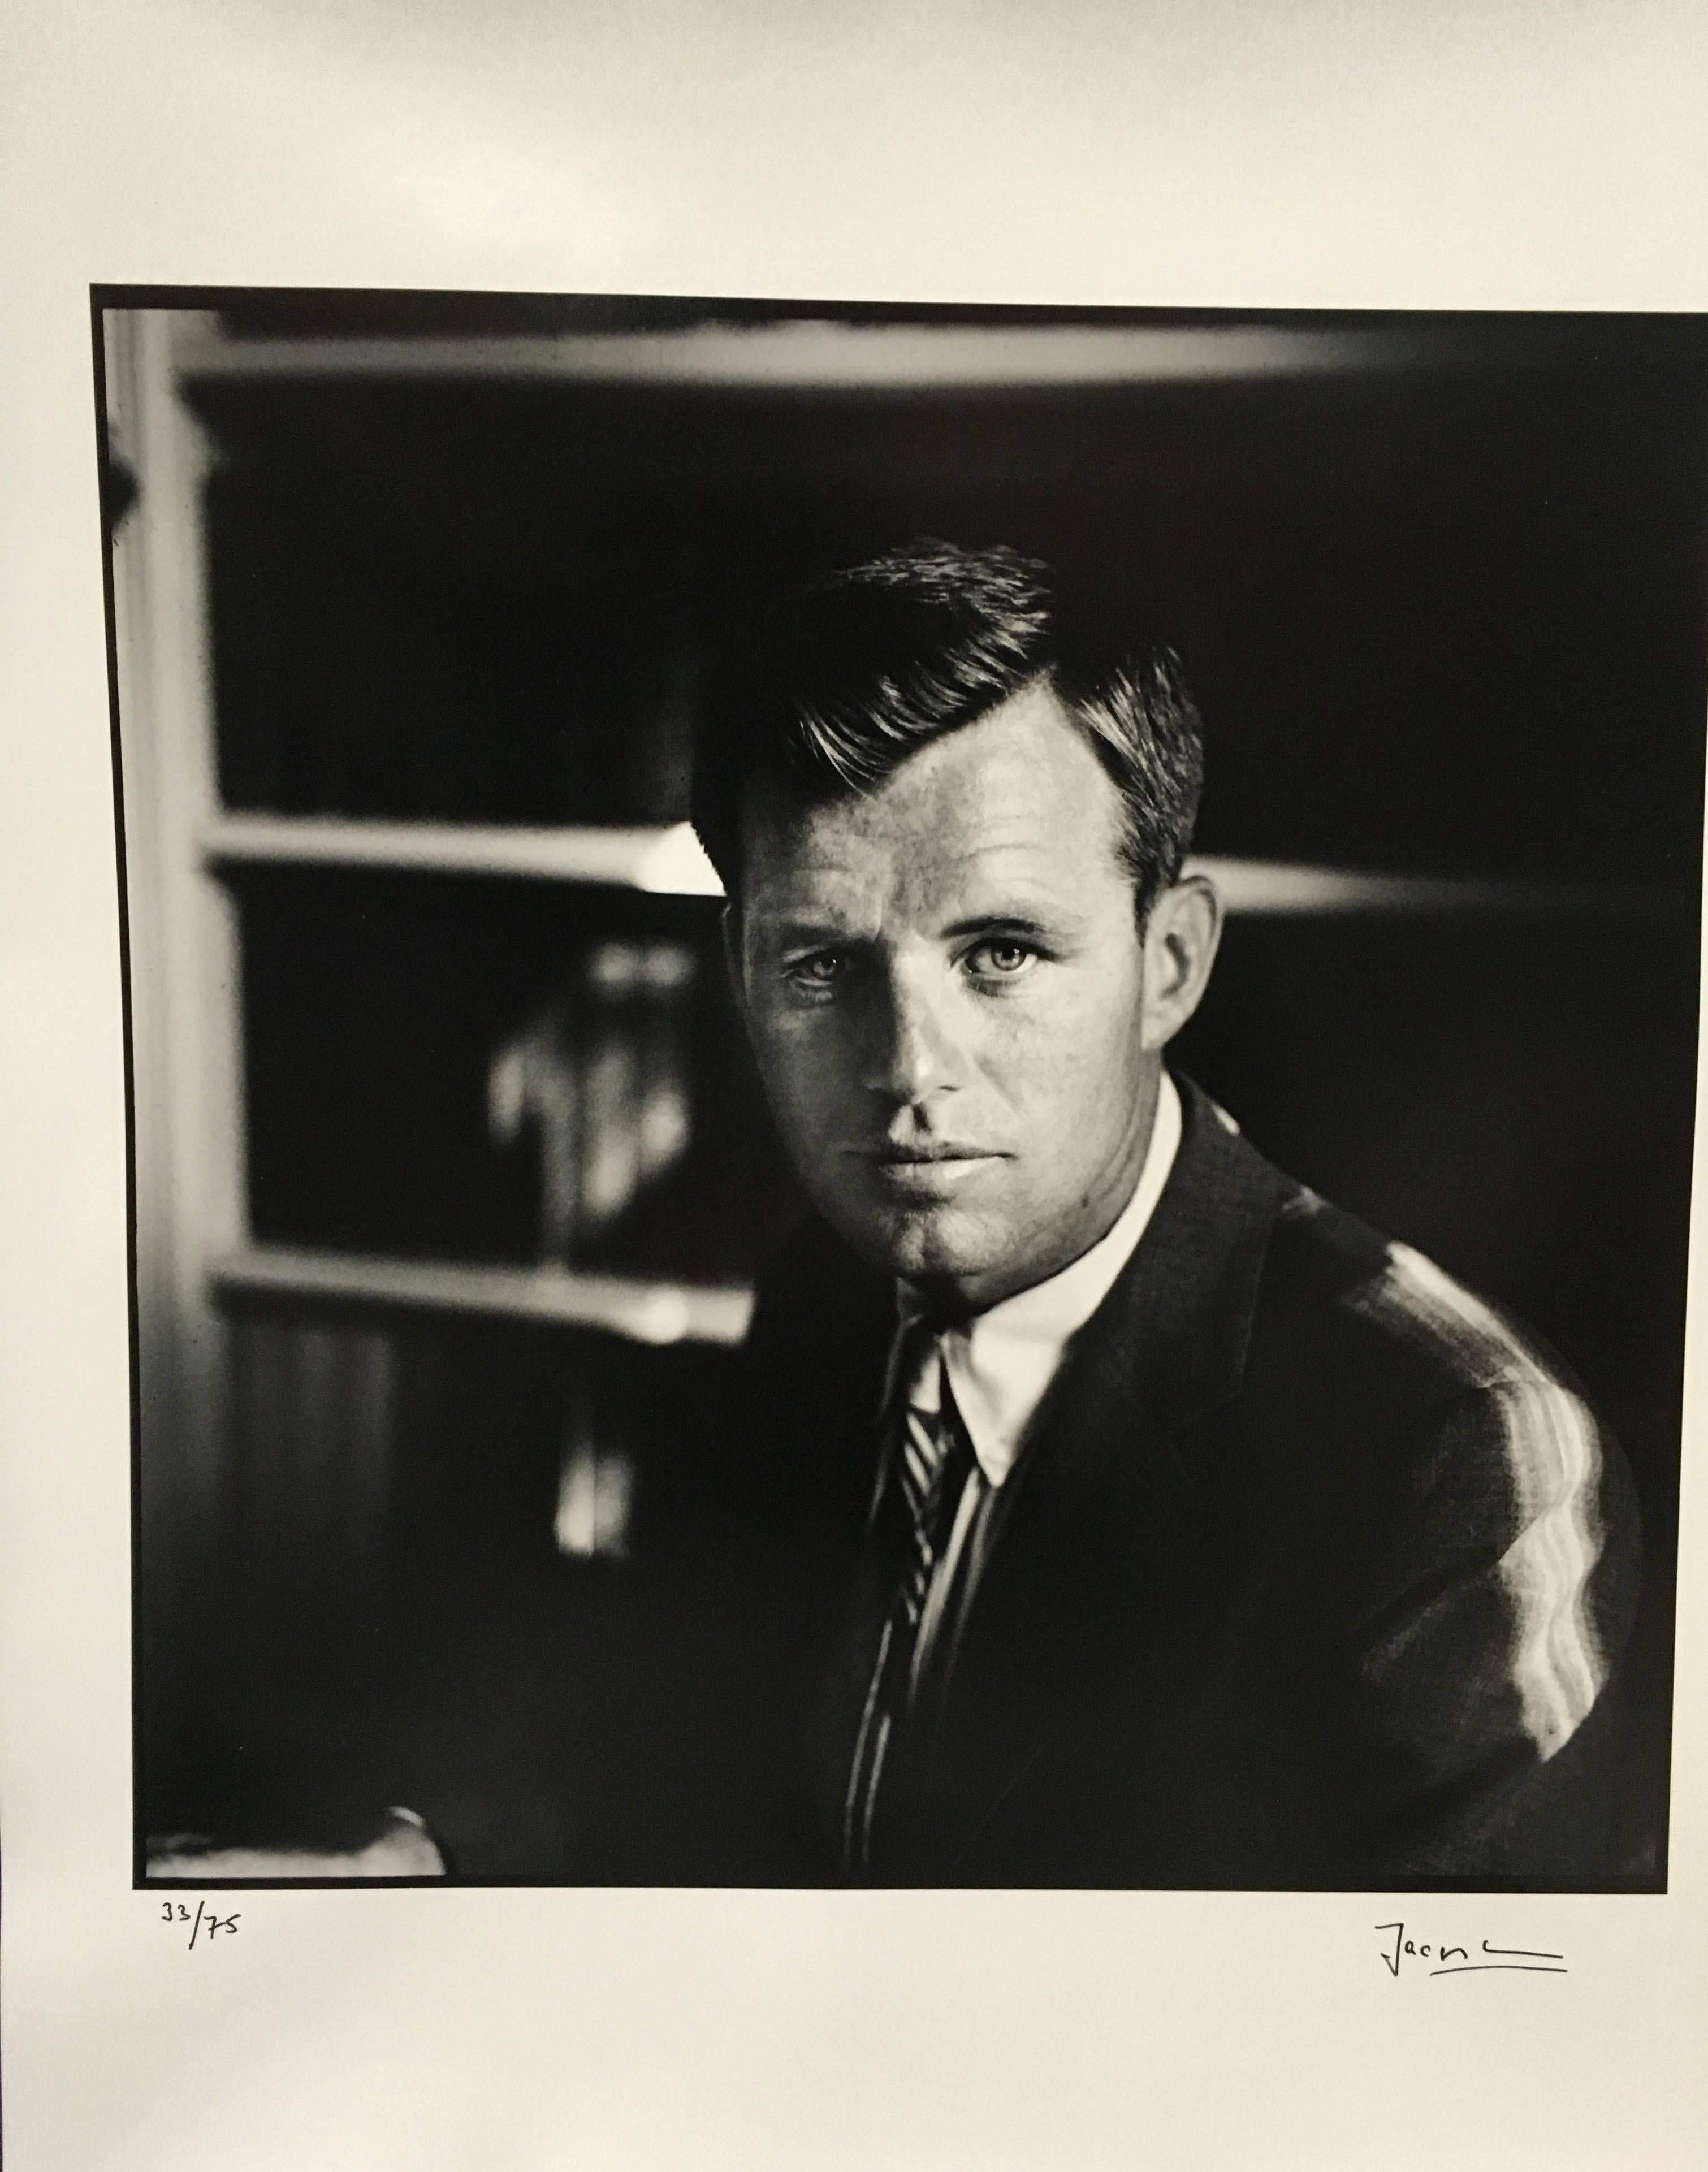 RFK, Hickory Hill, McLean, Virginia - Photograph by Jacques Lowe